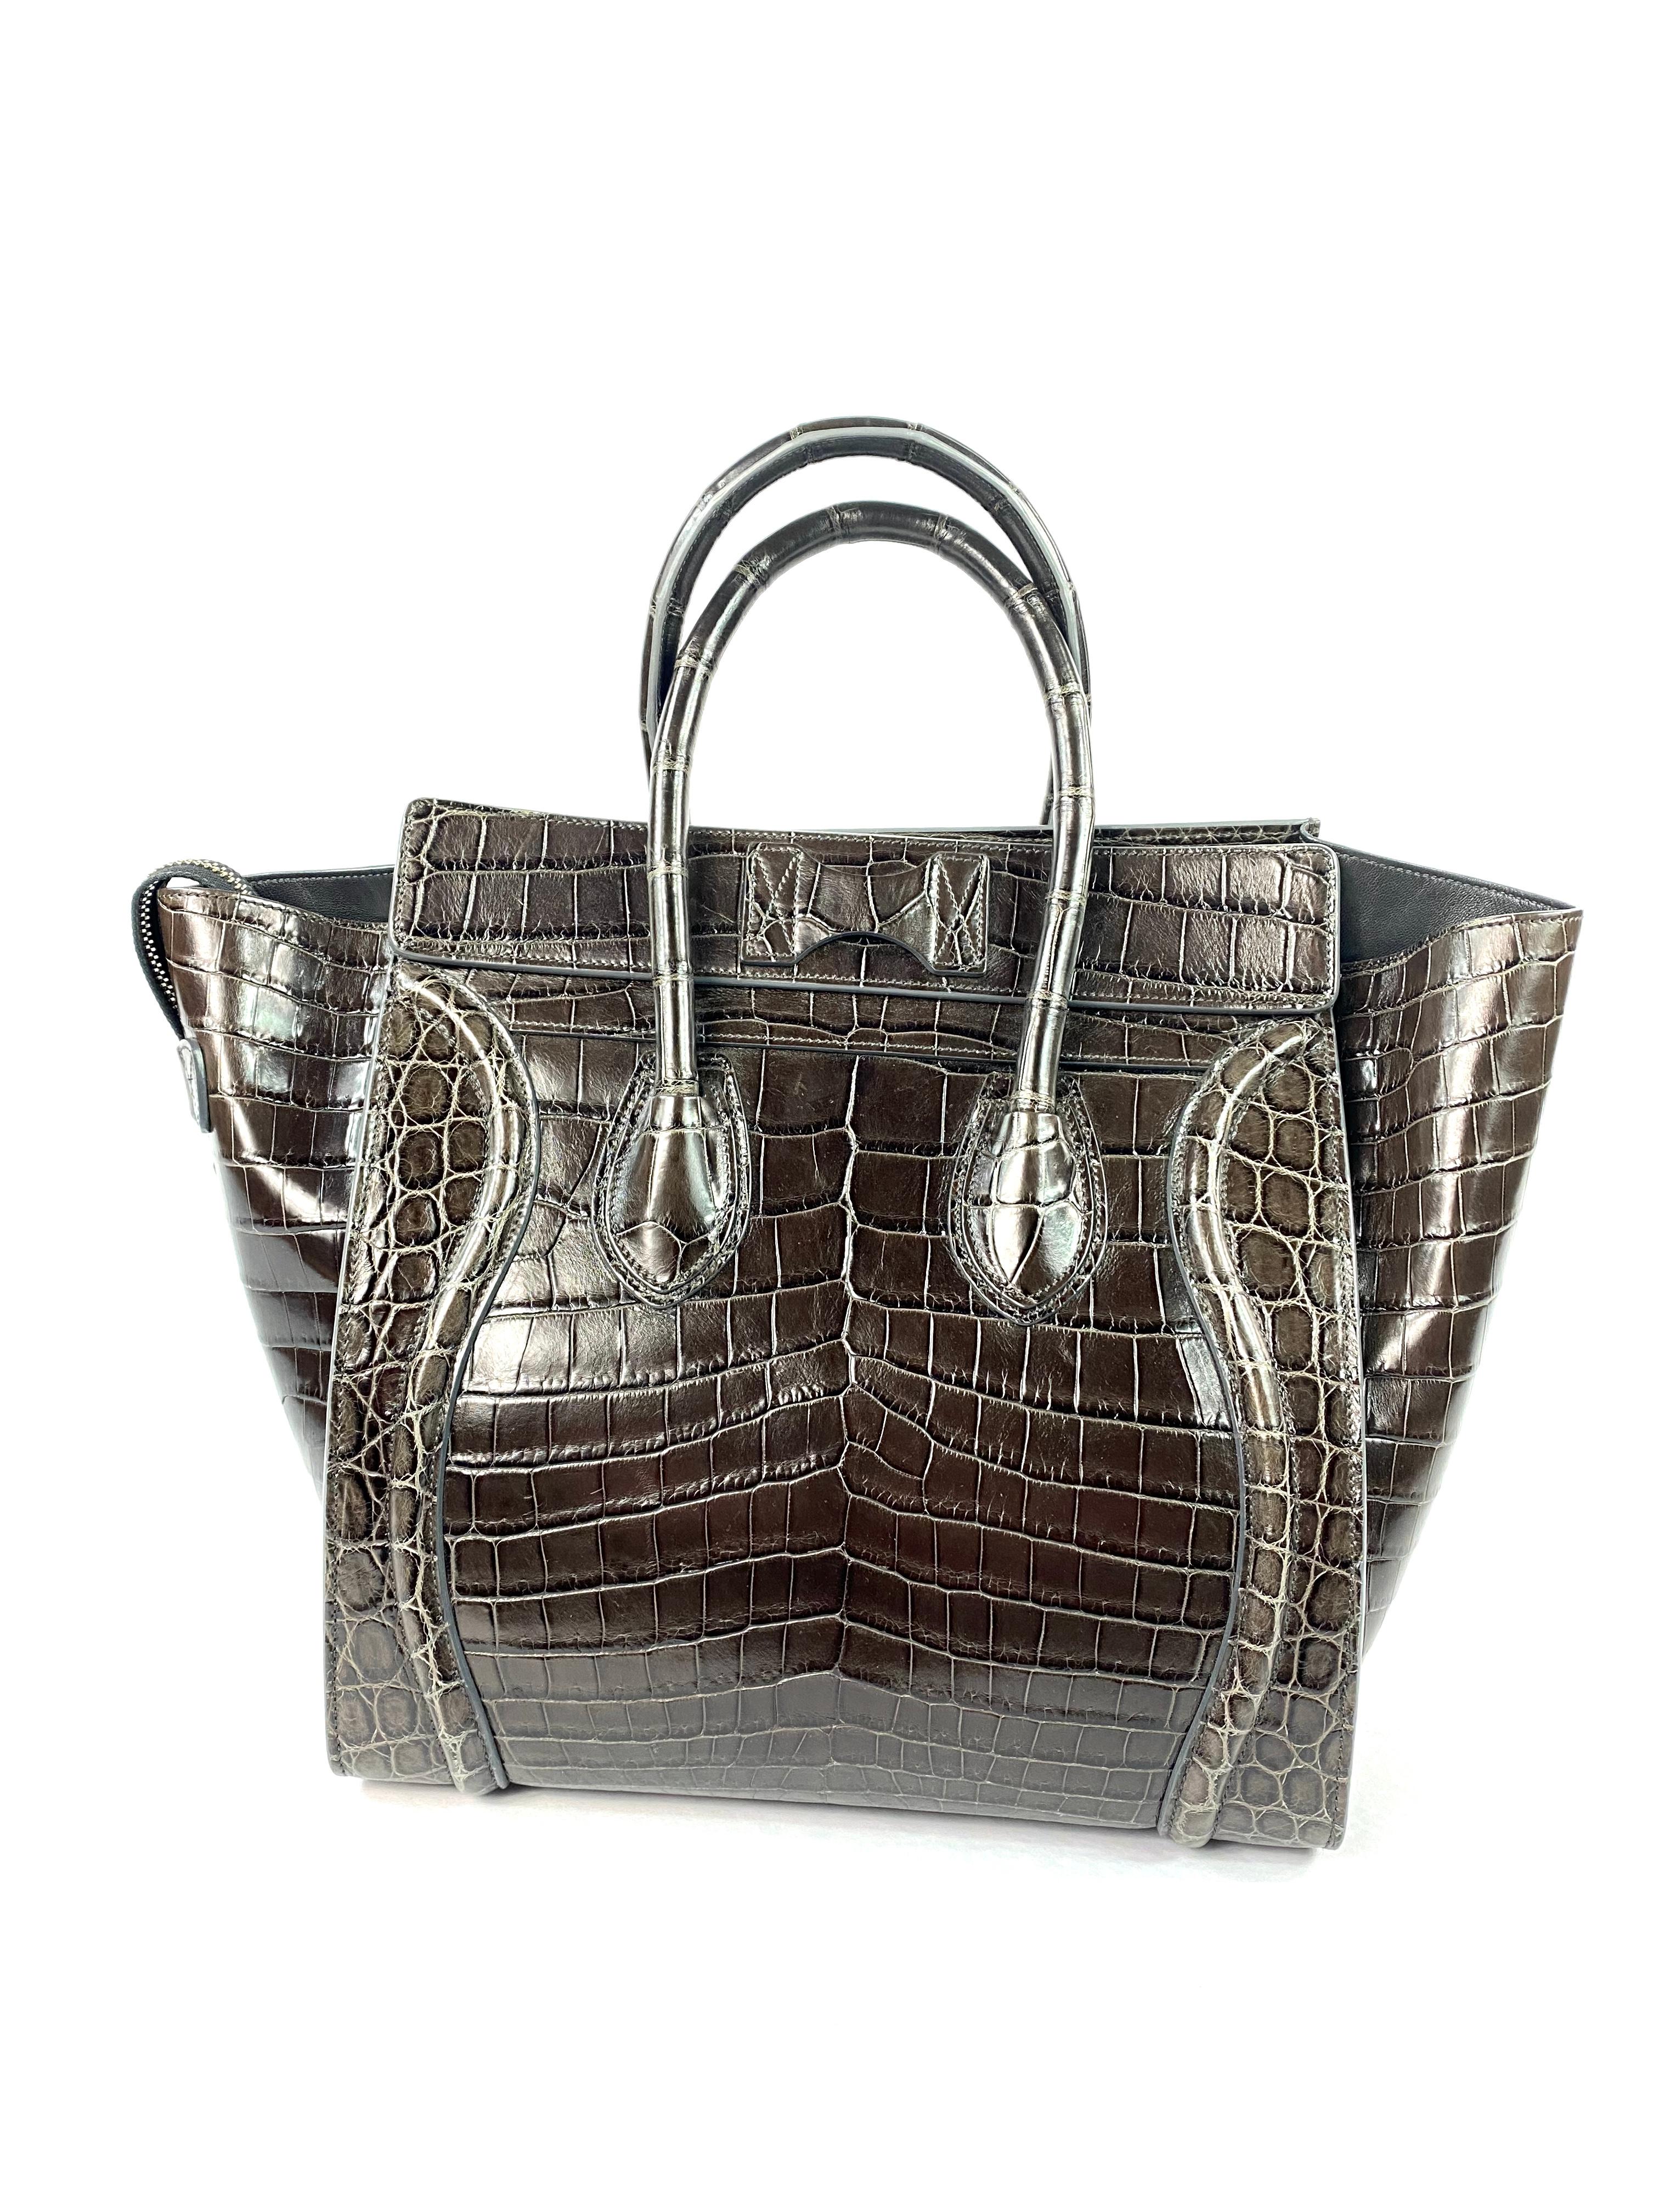 CELINE Brown Crocodile Medium Phantom Luggage Tote Bag In Excellent Condition For Sale In Beverly Hills, CA